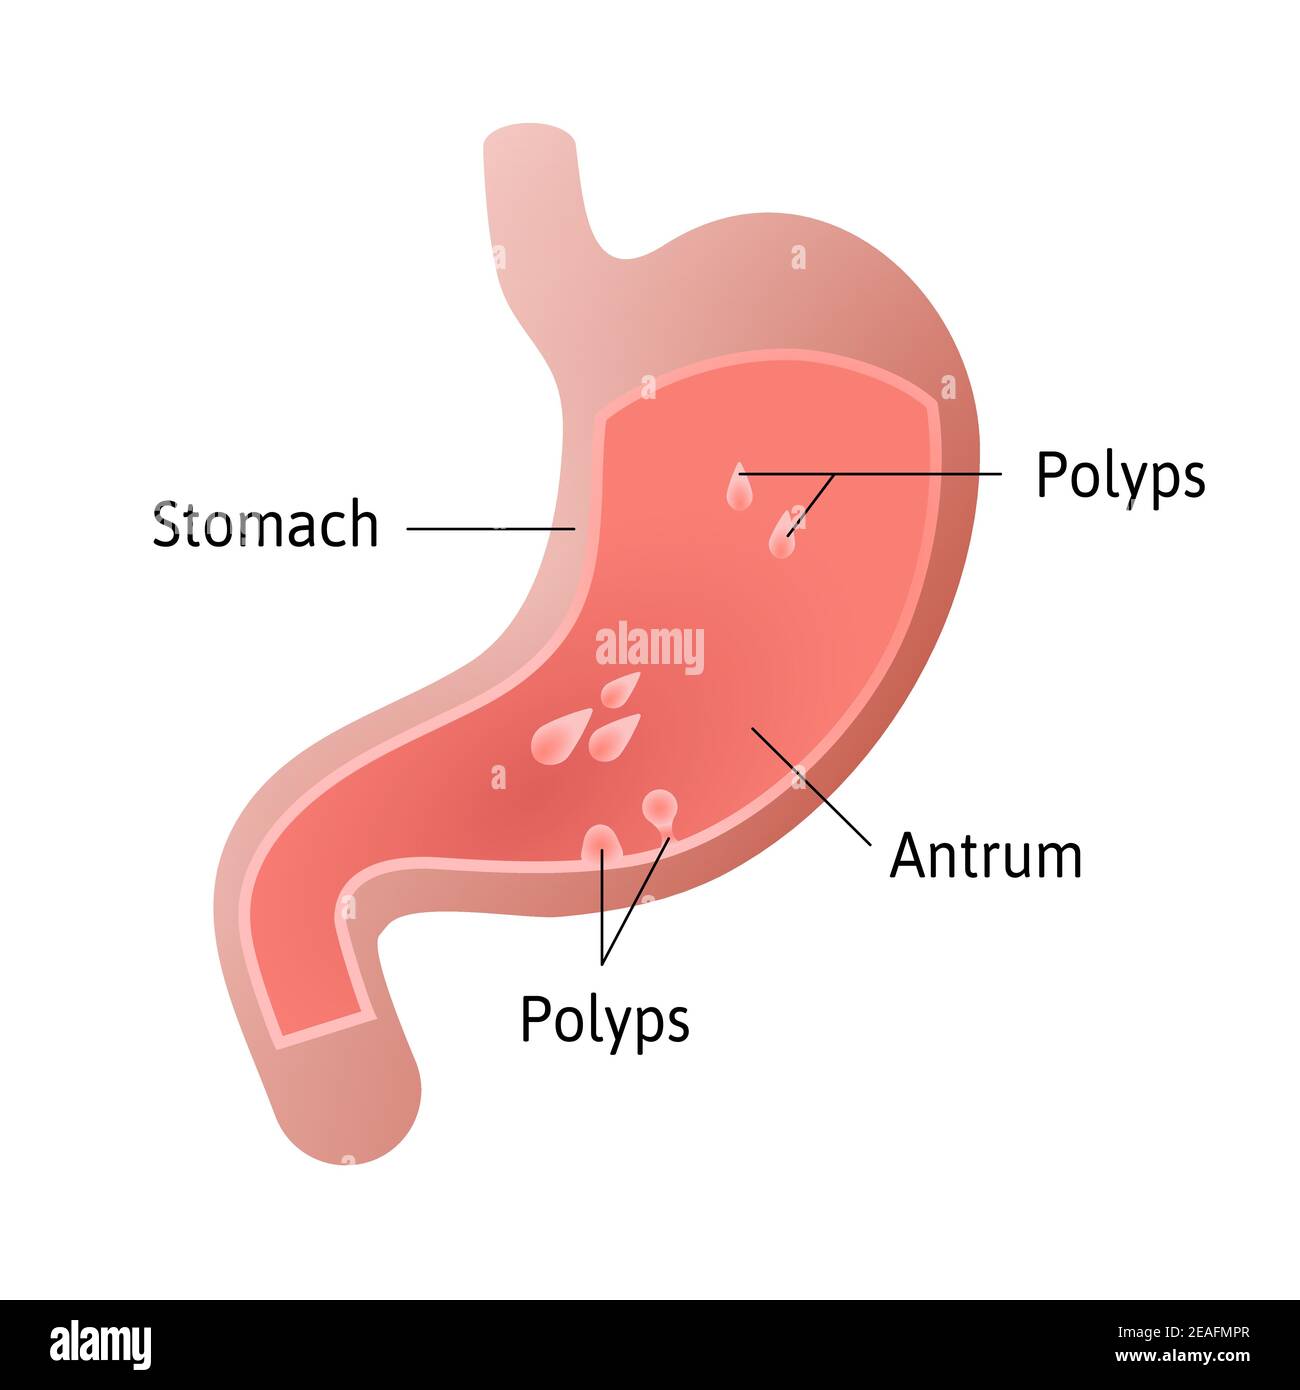 gastric polyps, masses of cells that form on the lining inside stomach. pedunculated and flat-based polyp. Antrum. Medical vector illustration marked Stock Vector